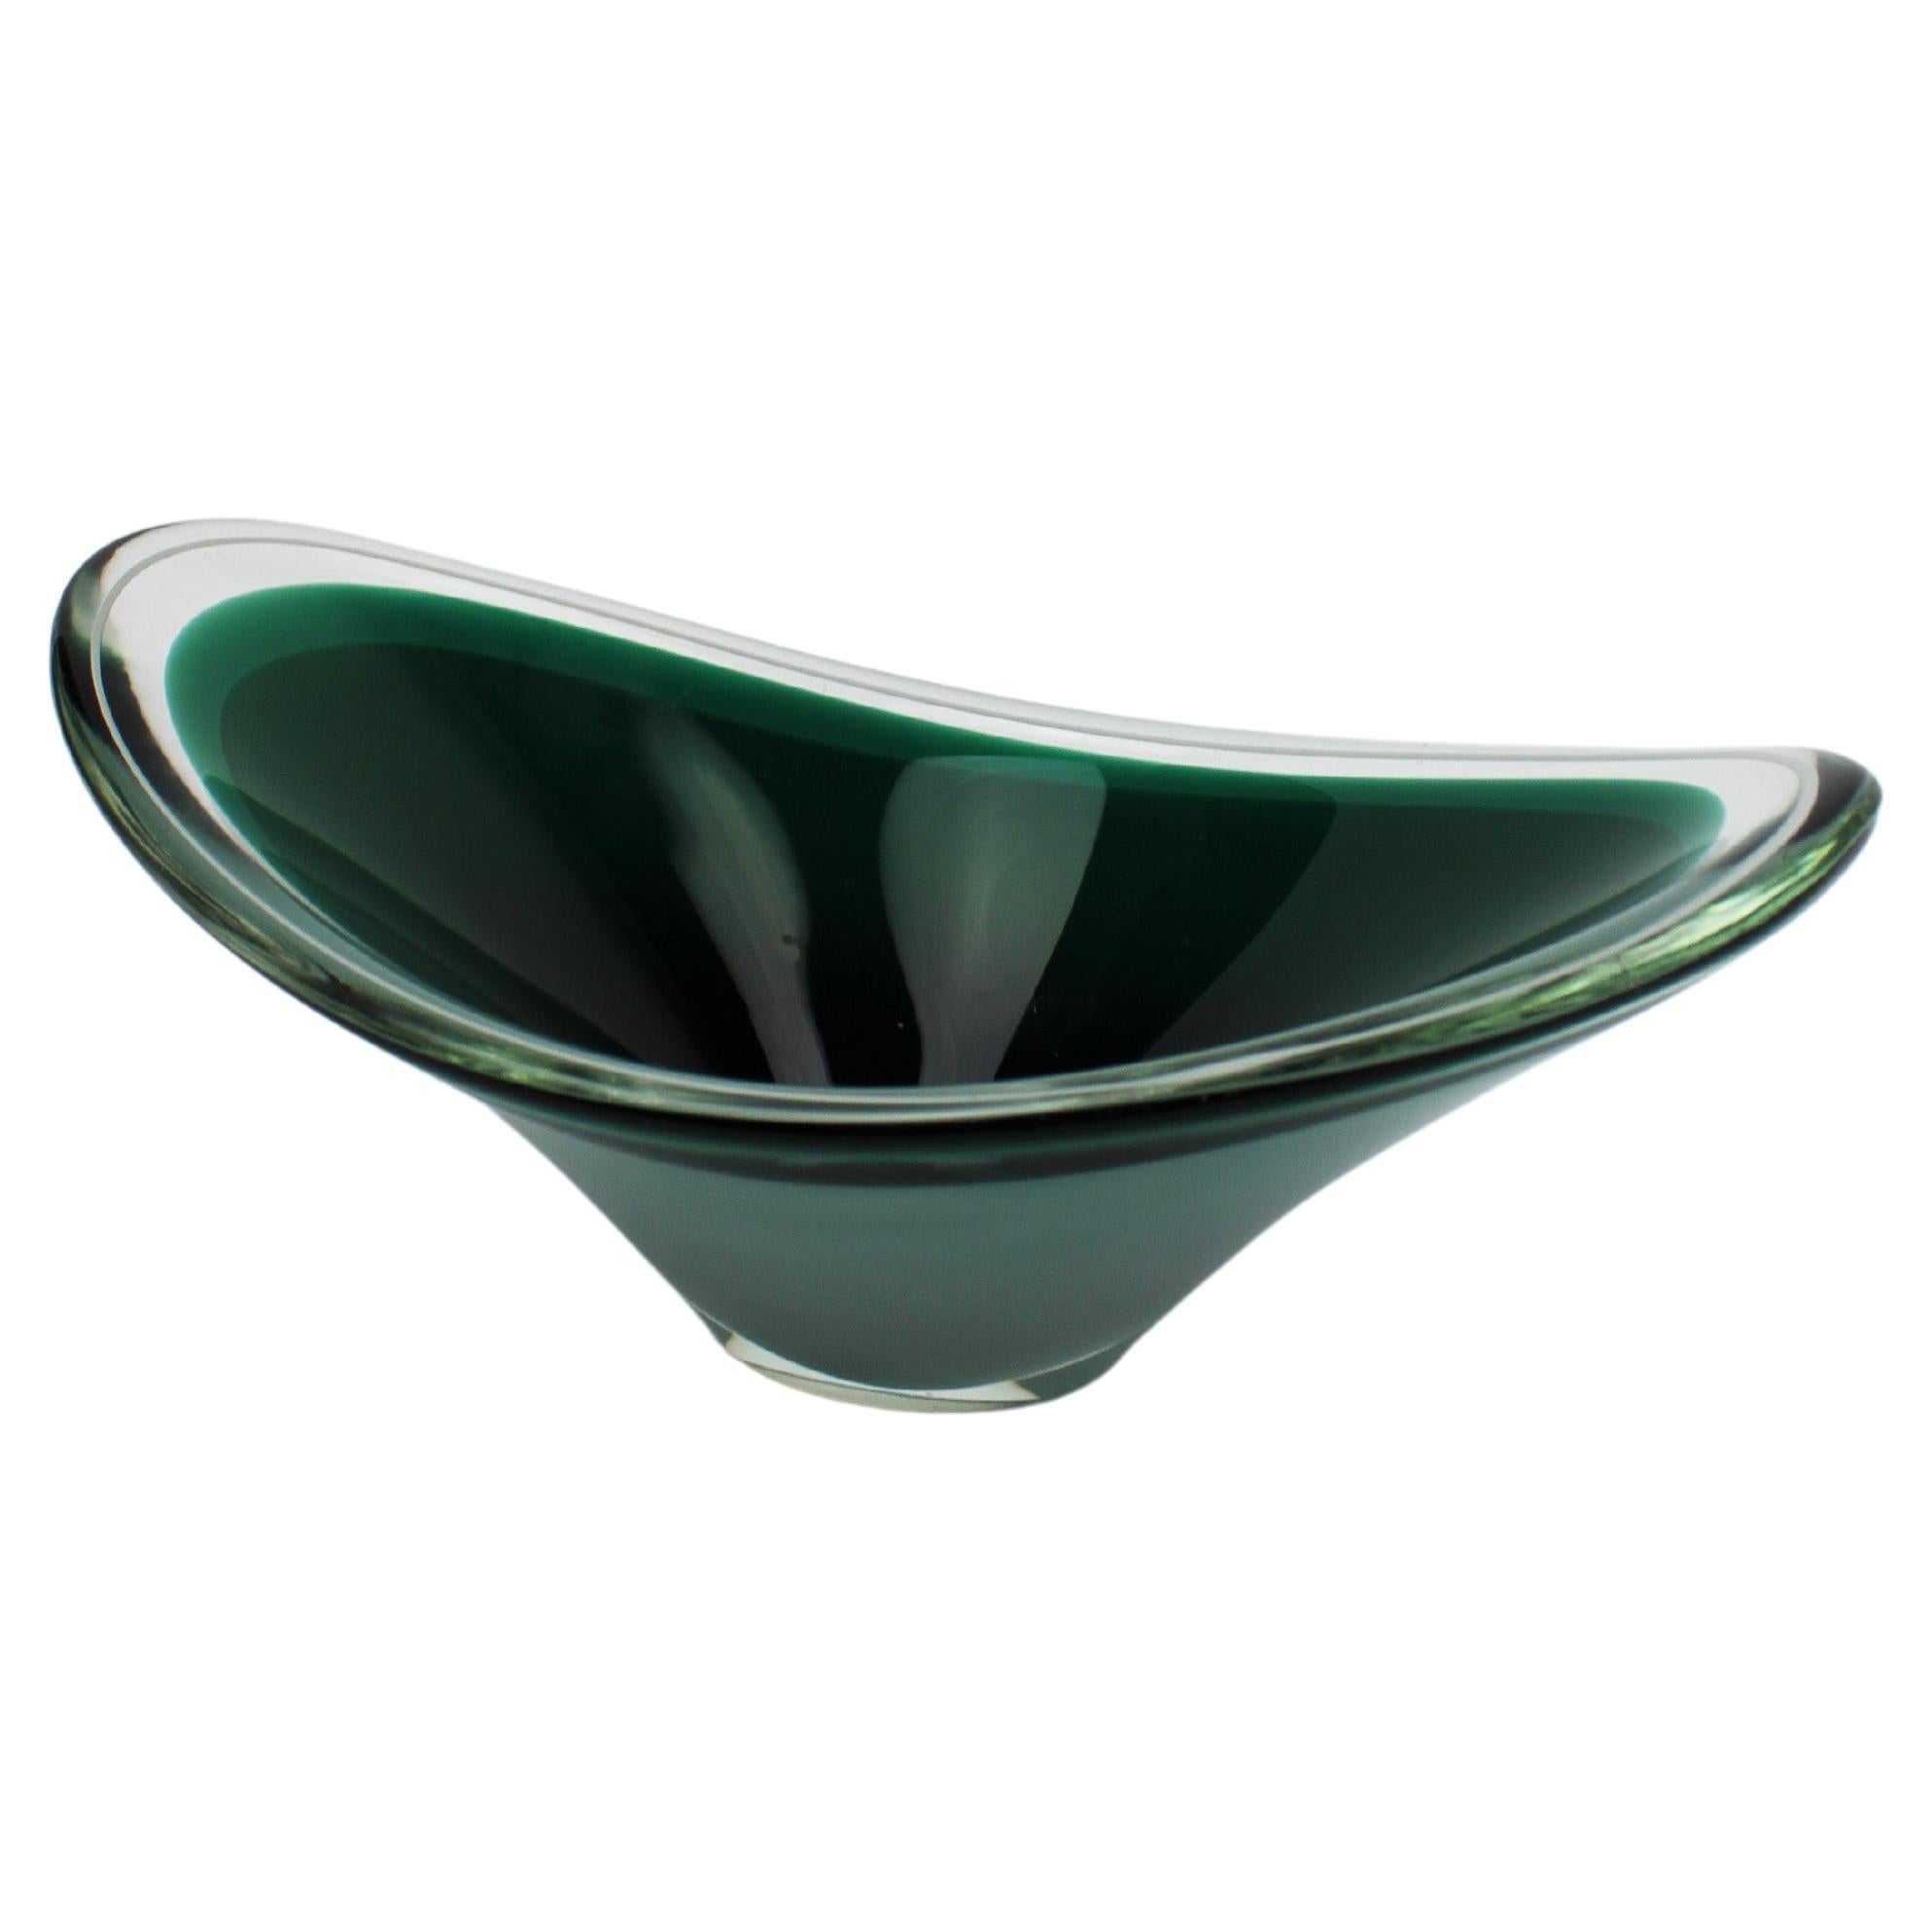 Green and white art Glass Bowl by Paul Kedelv for Flygsfors signed 1958 Sweden